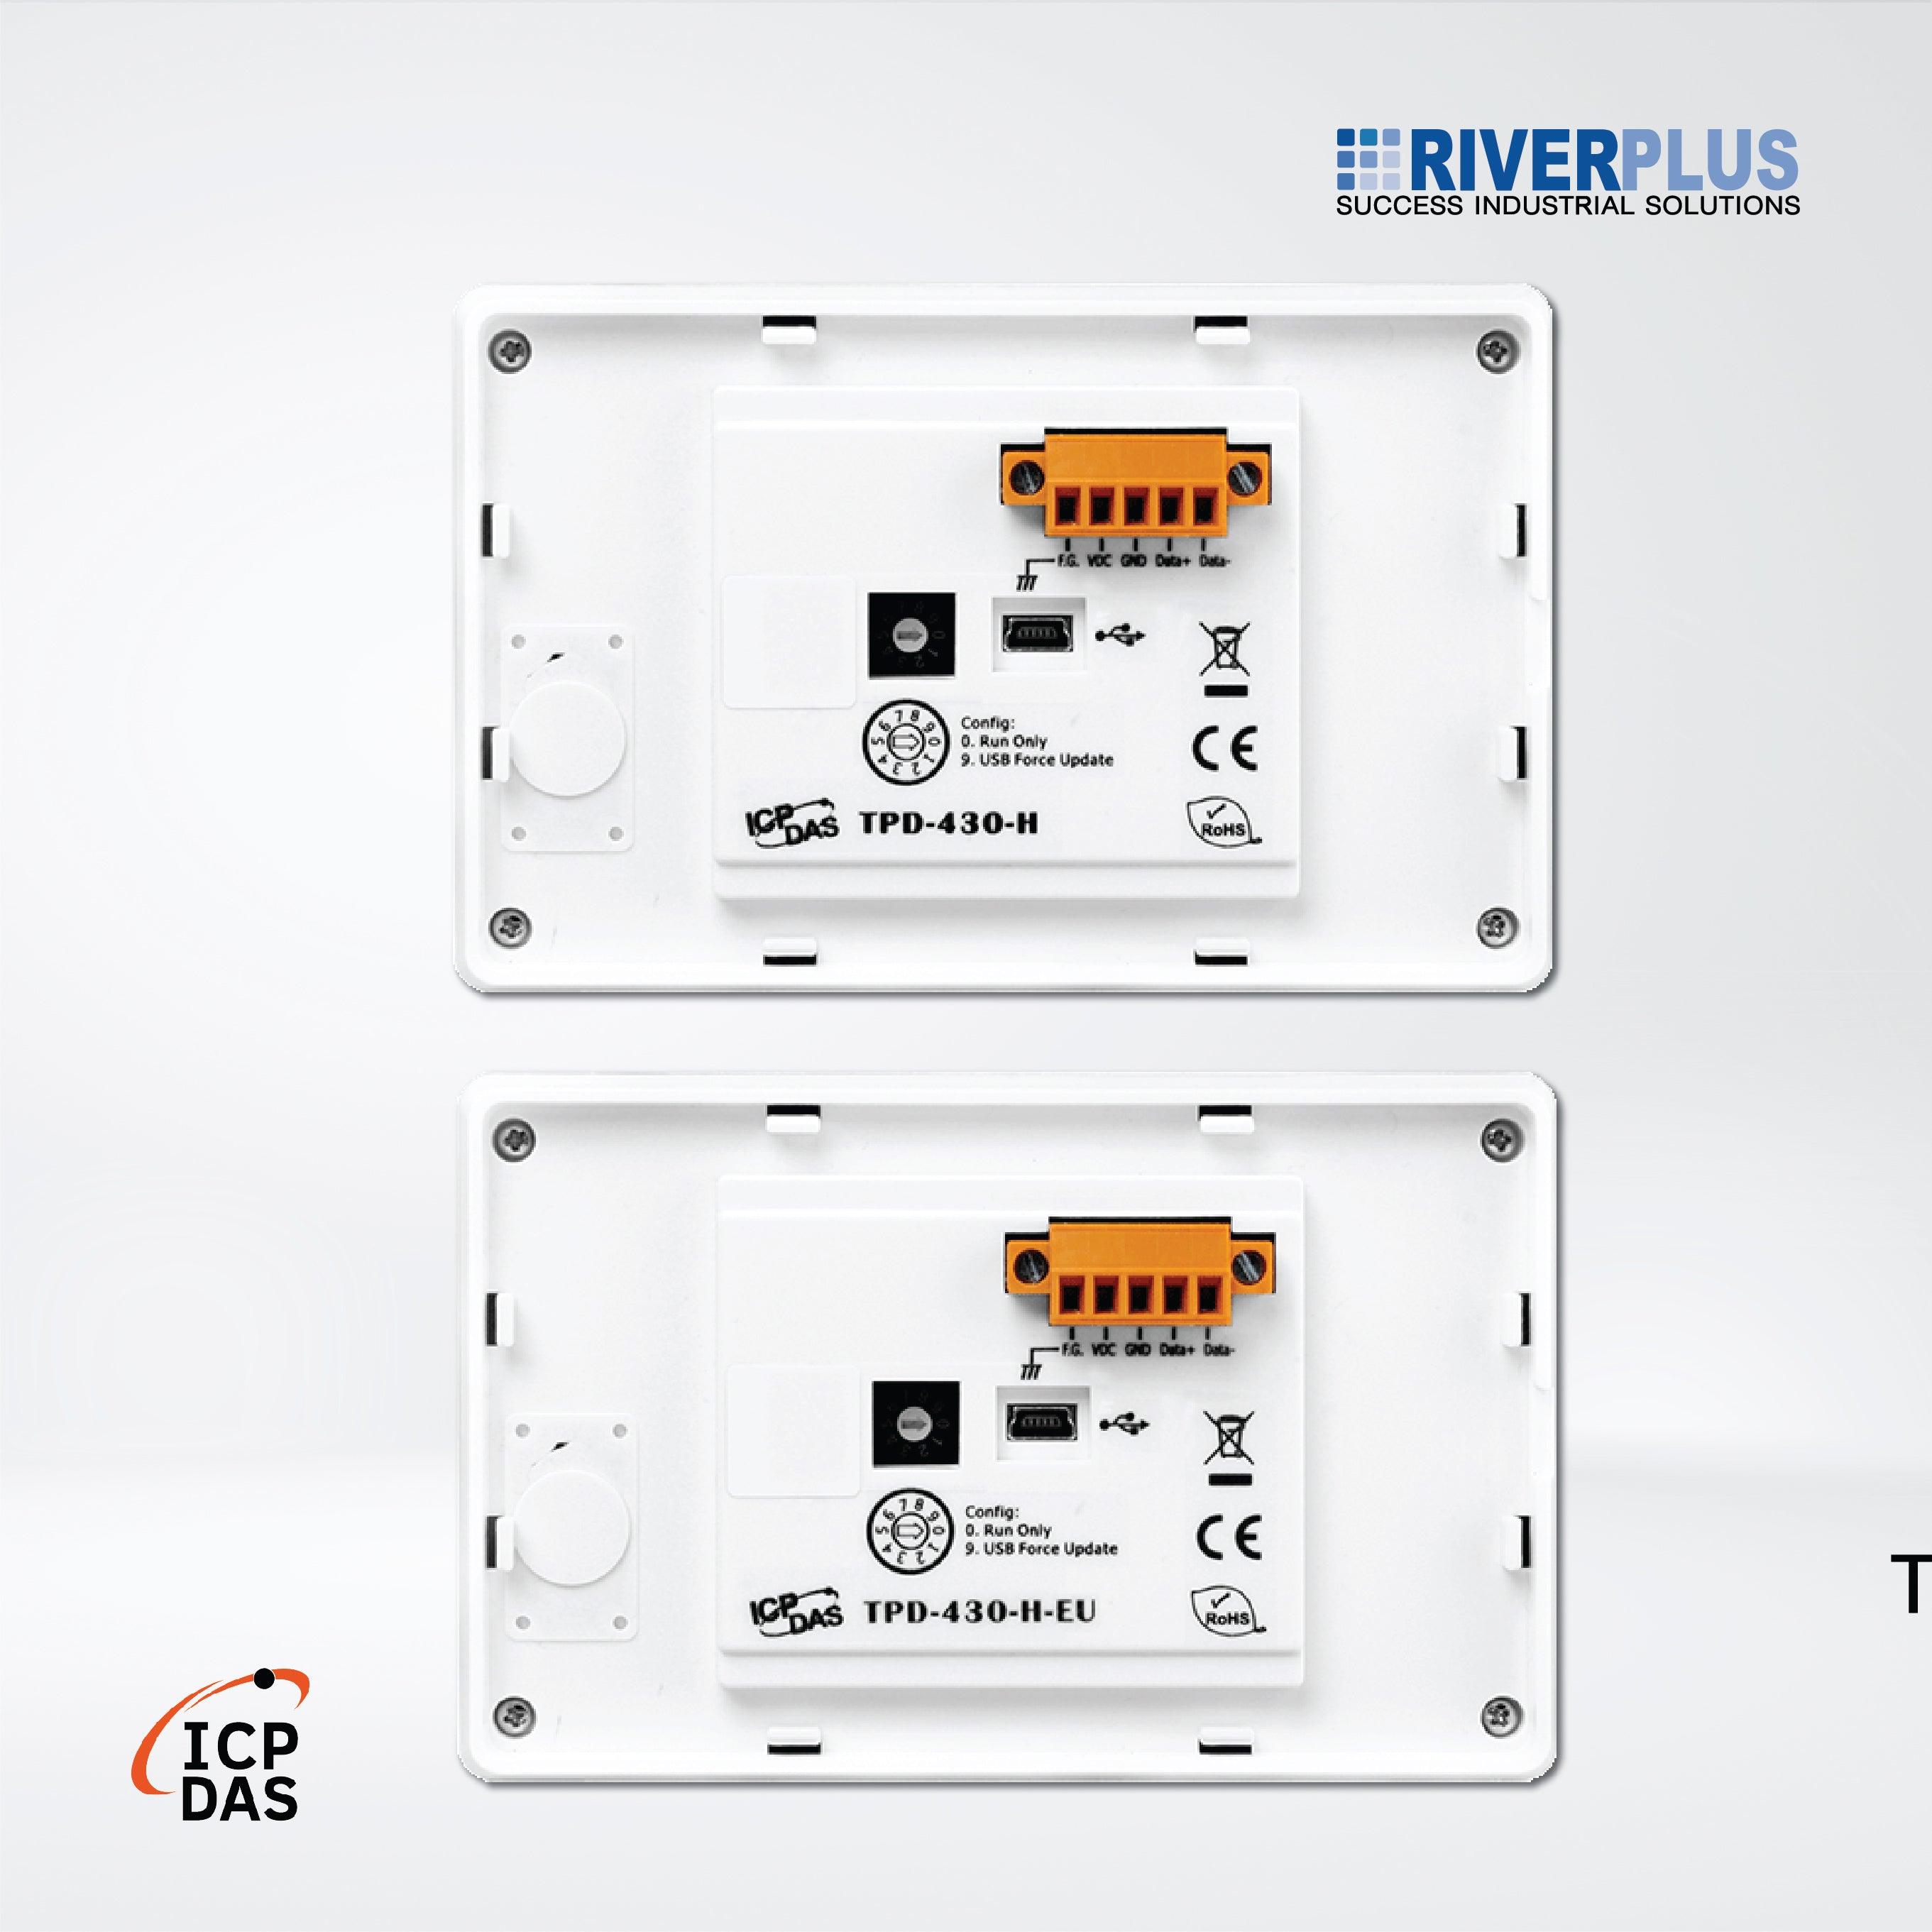 TPD-430-H 4.3" Touch HMI Device with 1 x RS-485, Suitable for Outlet Box in United States - Riverplus